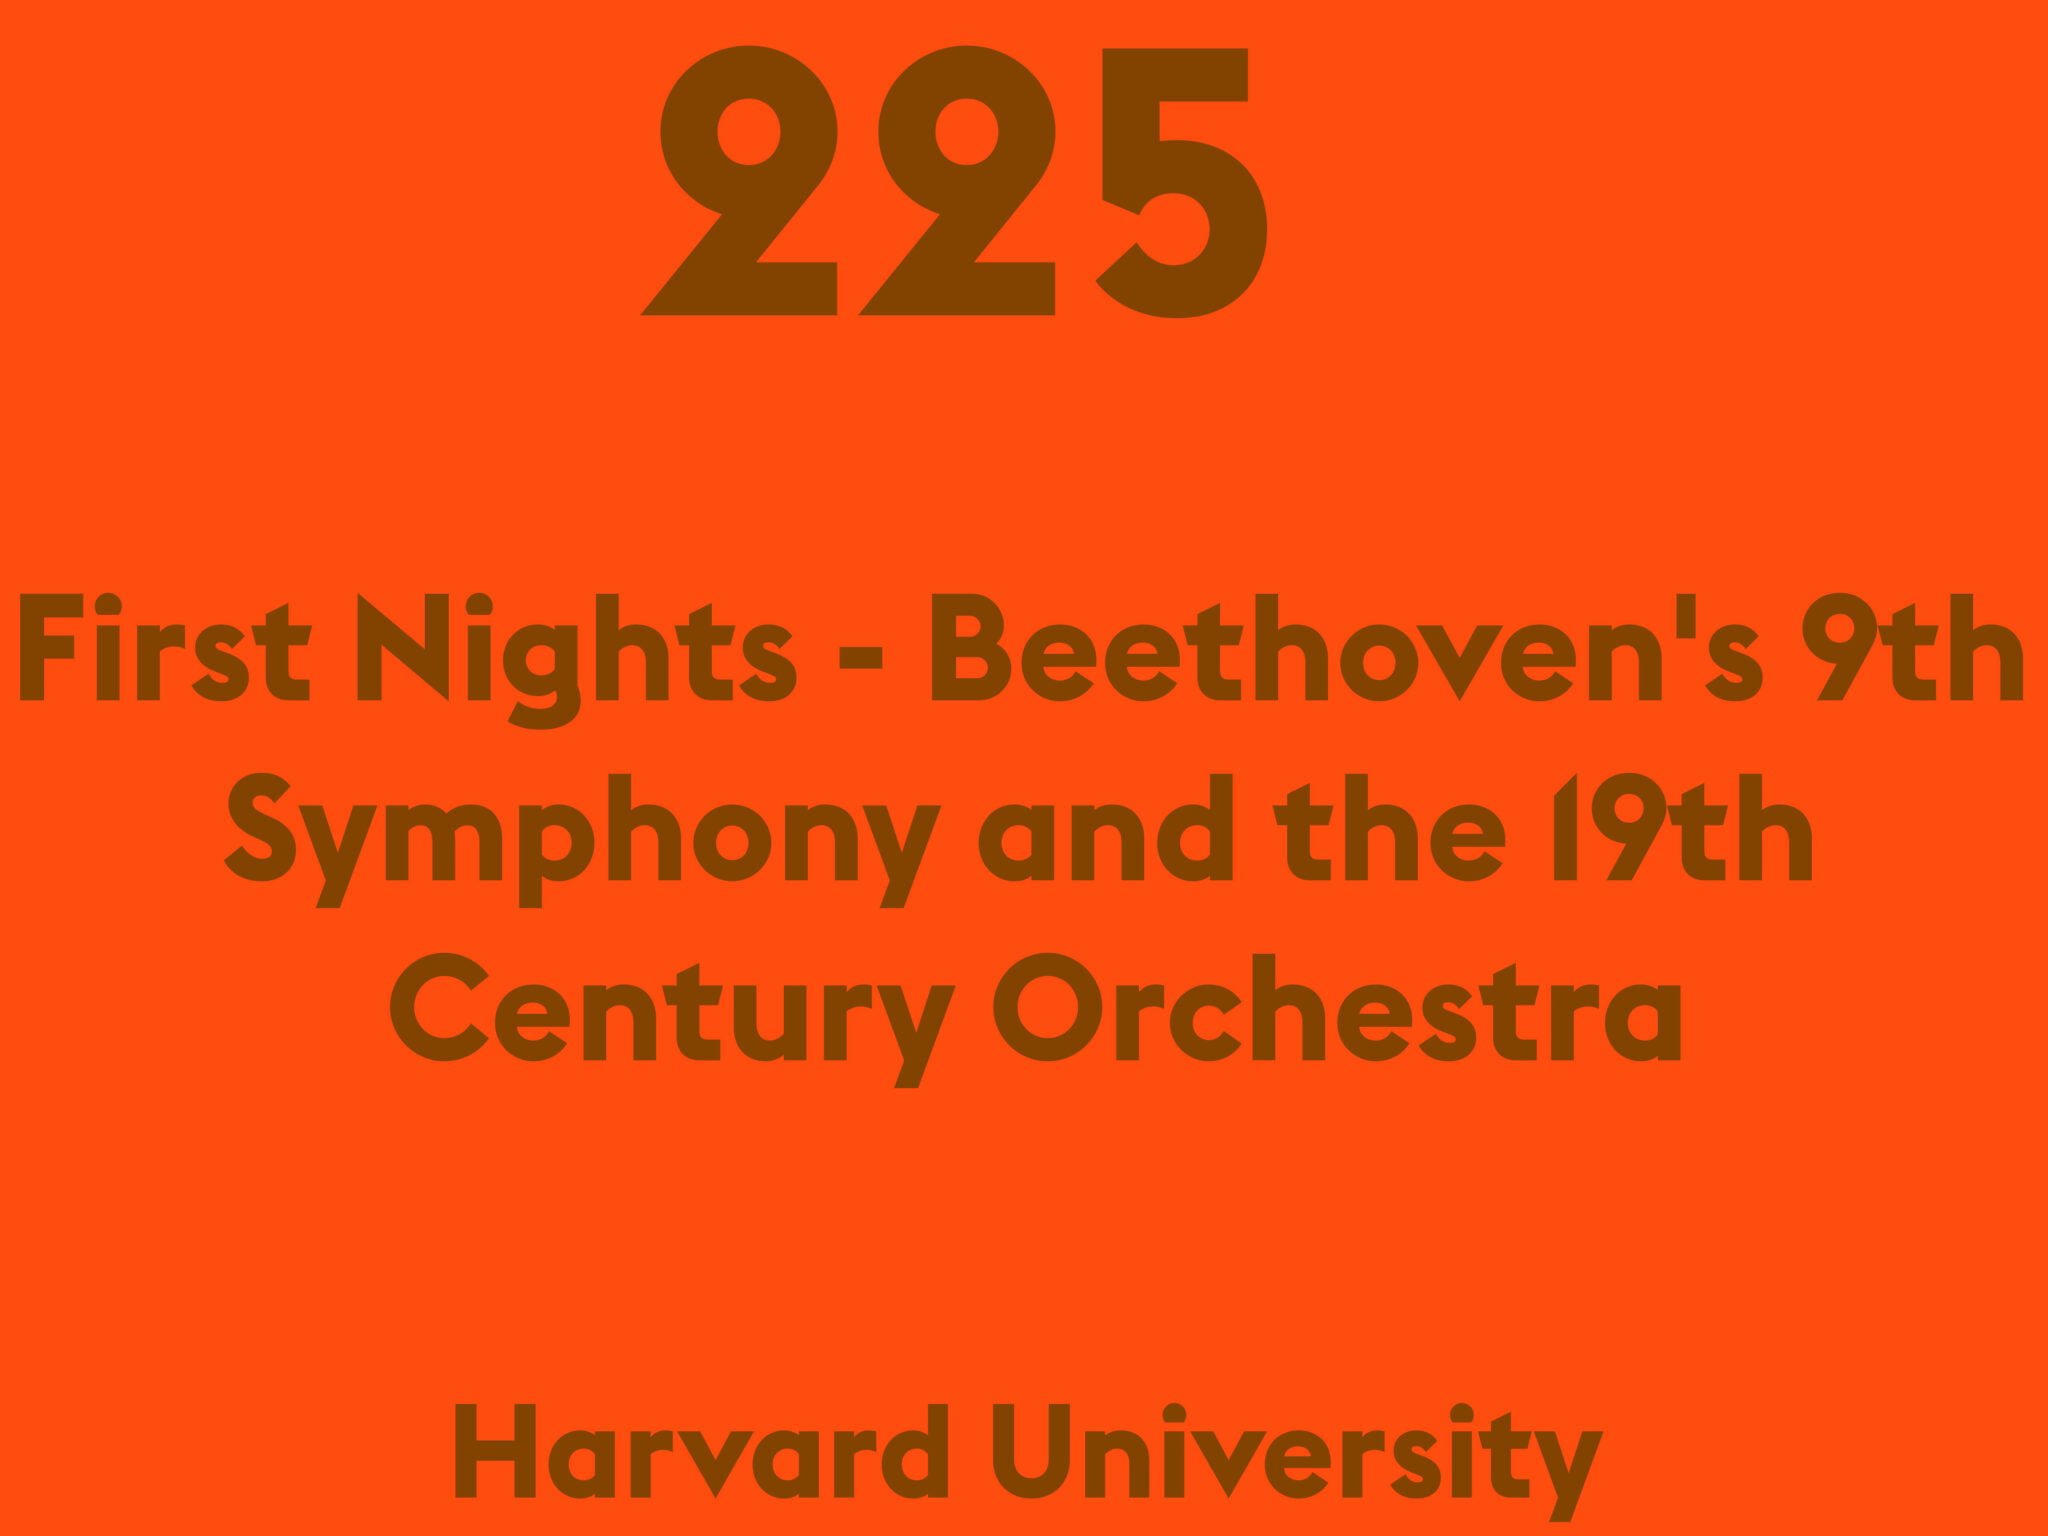 First Nights - Beethoven's 9th Symphony and the 19th Century Orchestra